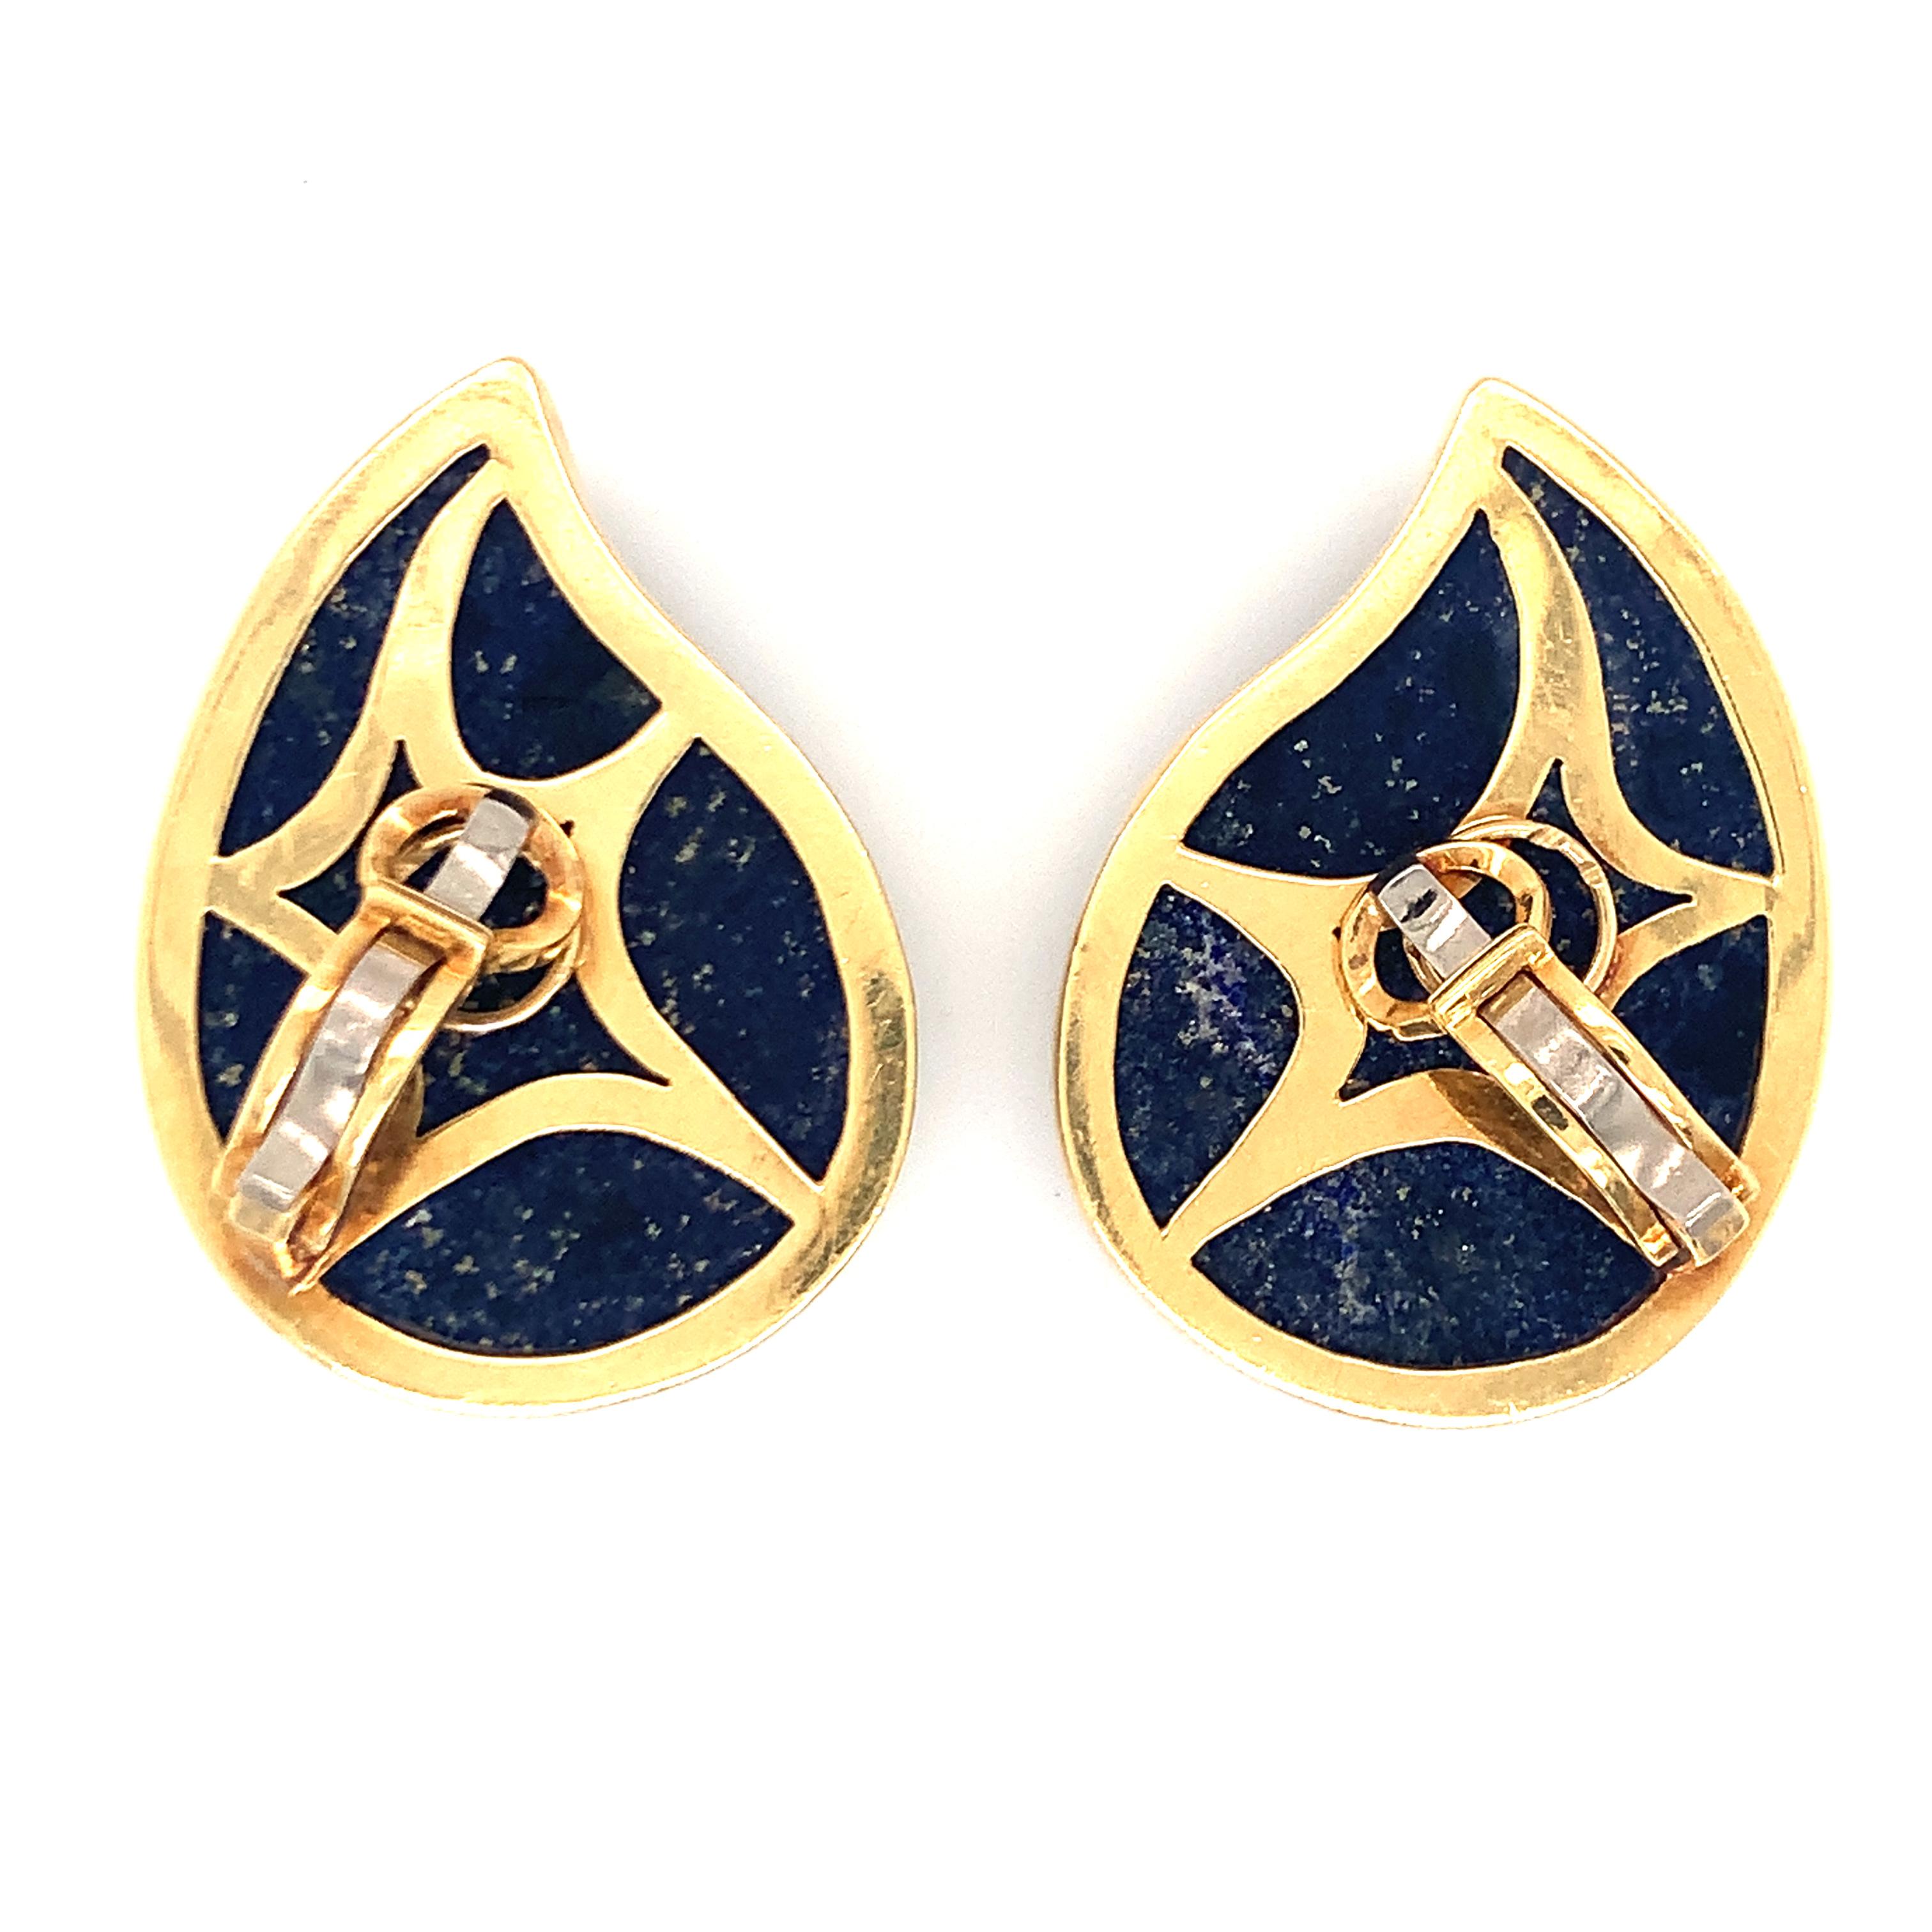 One pair of lapis lazuli and diamond 18K yellow gold earrings featuring two tear drop shaped lapis stones enhanced with 48 single round cut diamonds totaling 1.50 ct. Circa 1970s.

Impressive, glossy, cobalt.

Additional information:
Metal: 18K